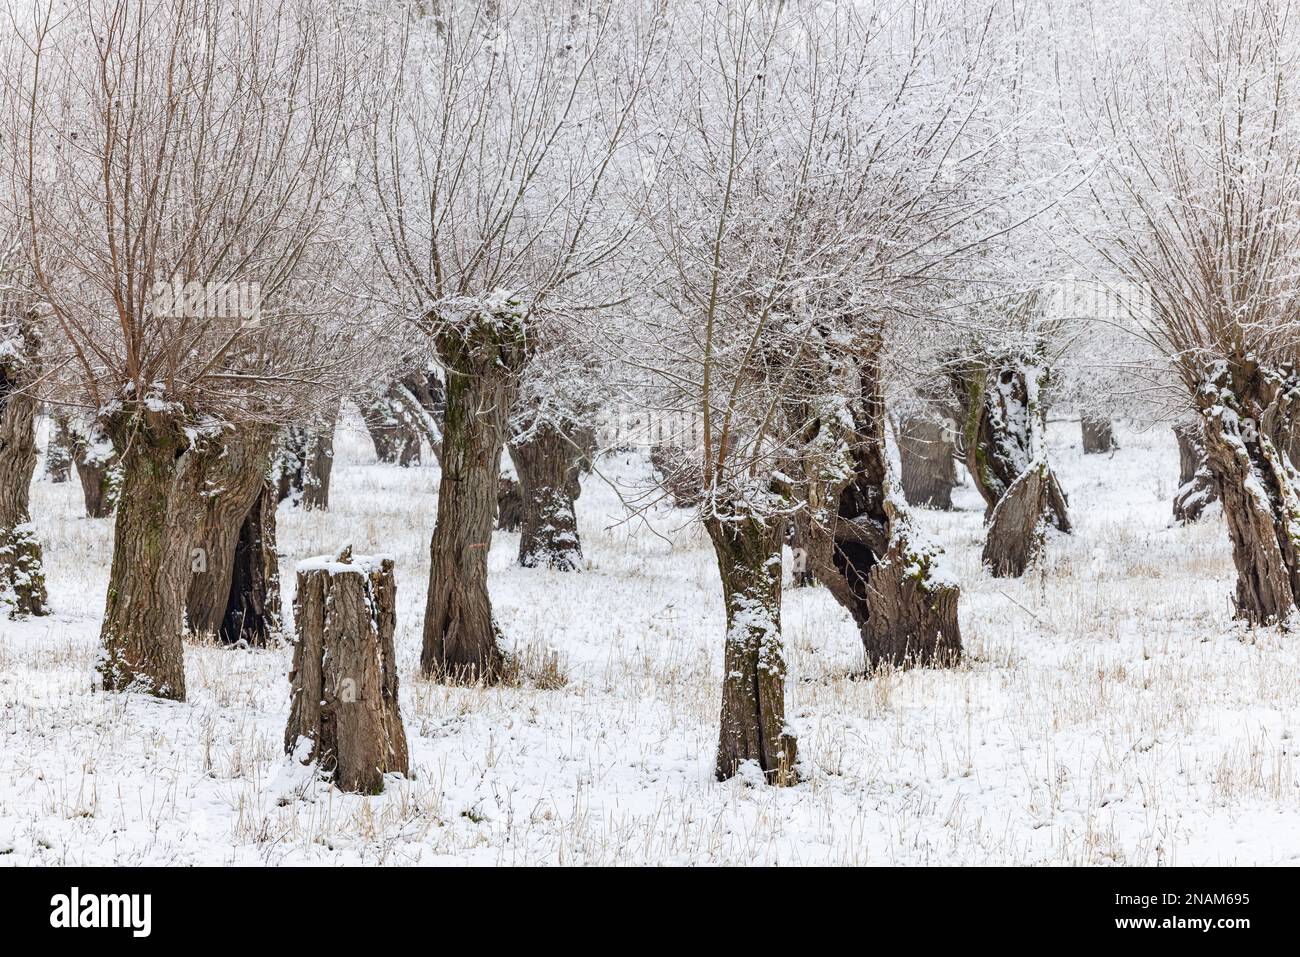 Picturesque snowy pollarded willows on a meadow with snow and ice in winter, Germany Stock Photo